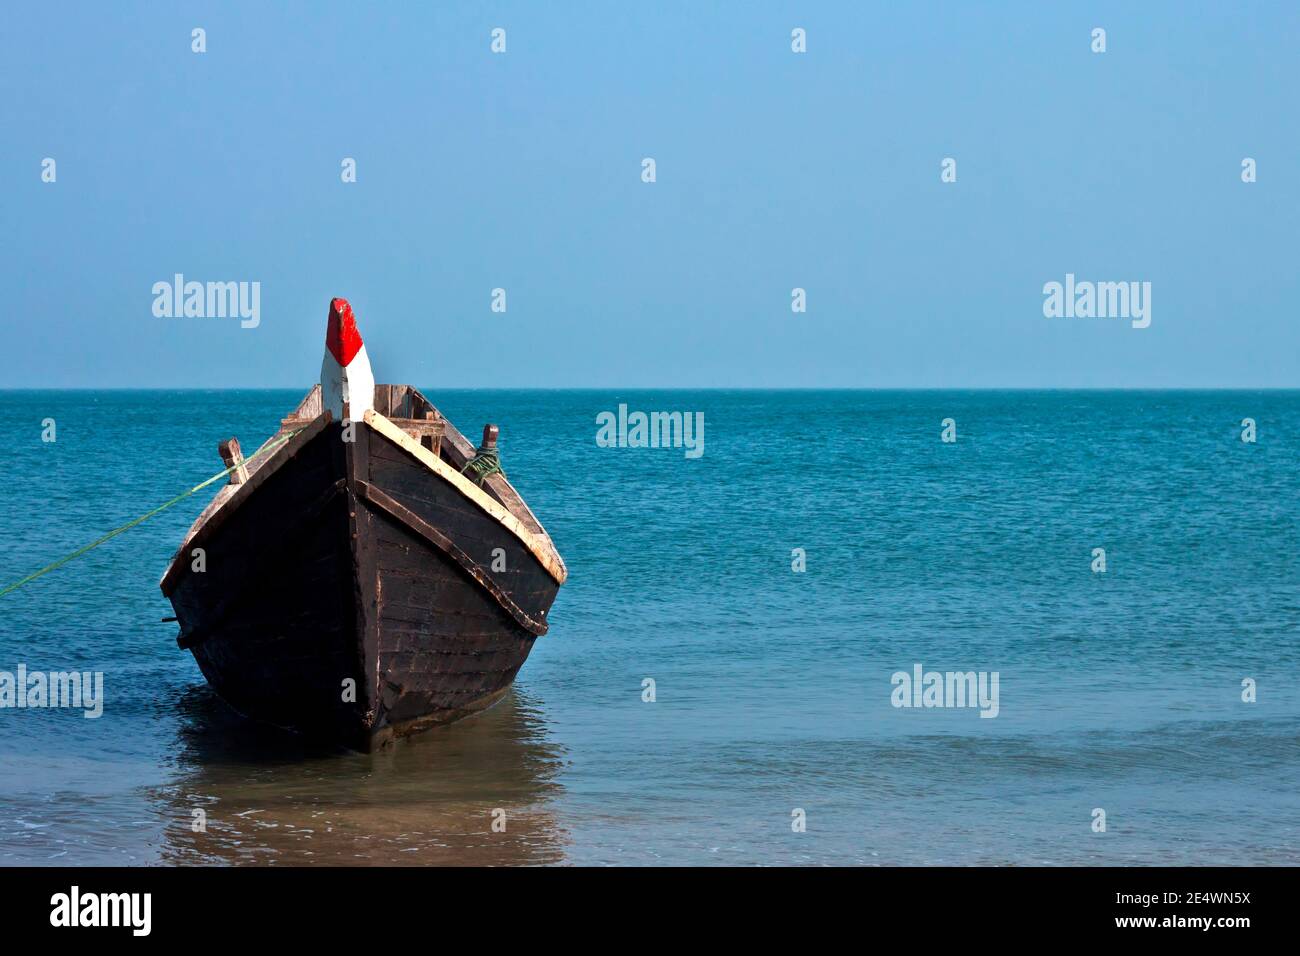 A lone wooden boat floating in the waters of the blue sea. Stock Photo